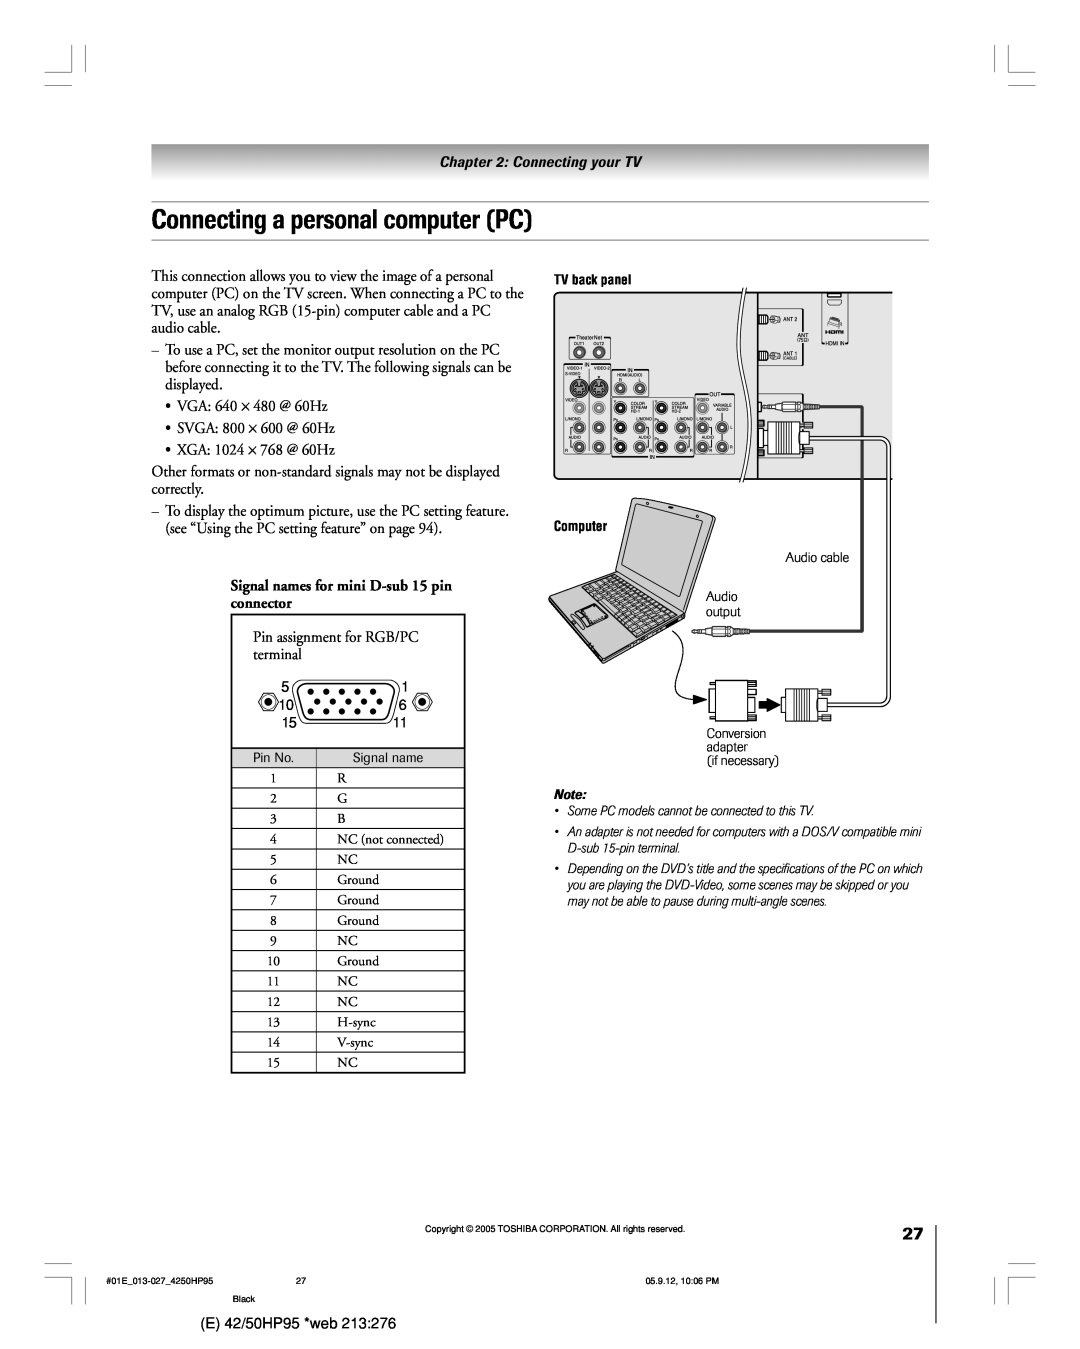 Toshiba 42HP95 owner manual Connecting a personal computer PC, Signal names for mini D-sub 15 pin connector 